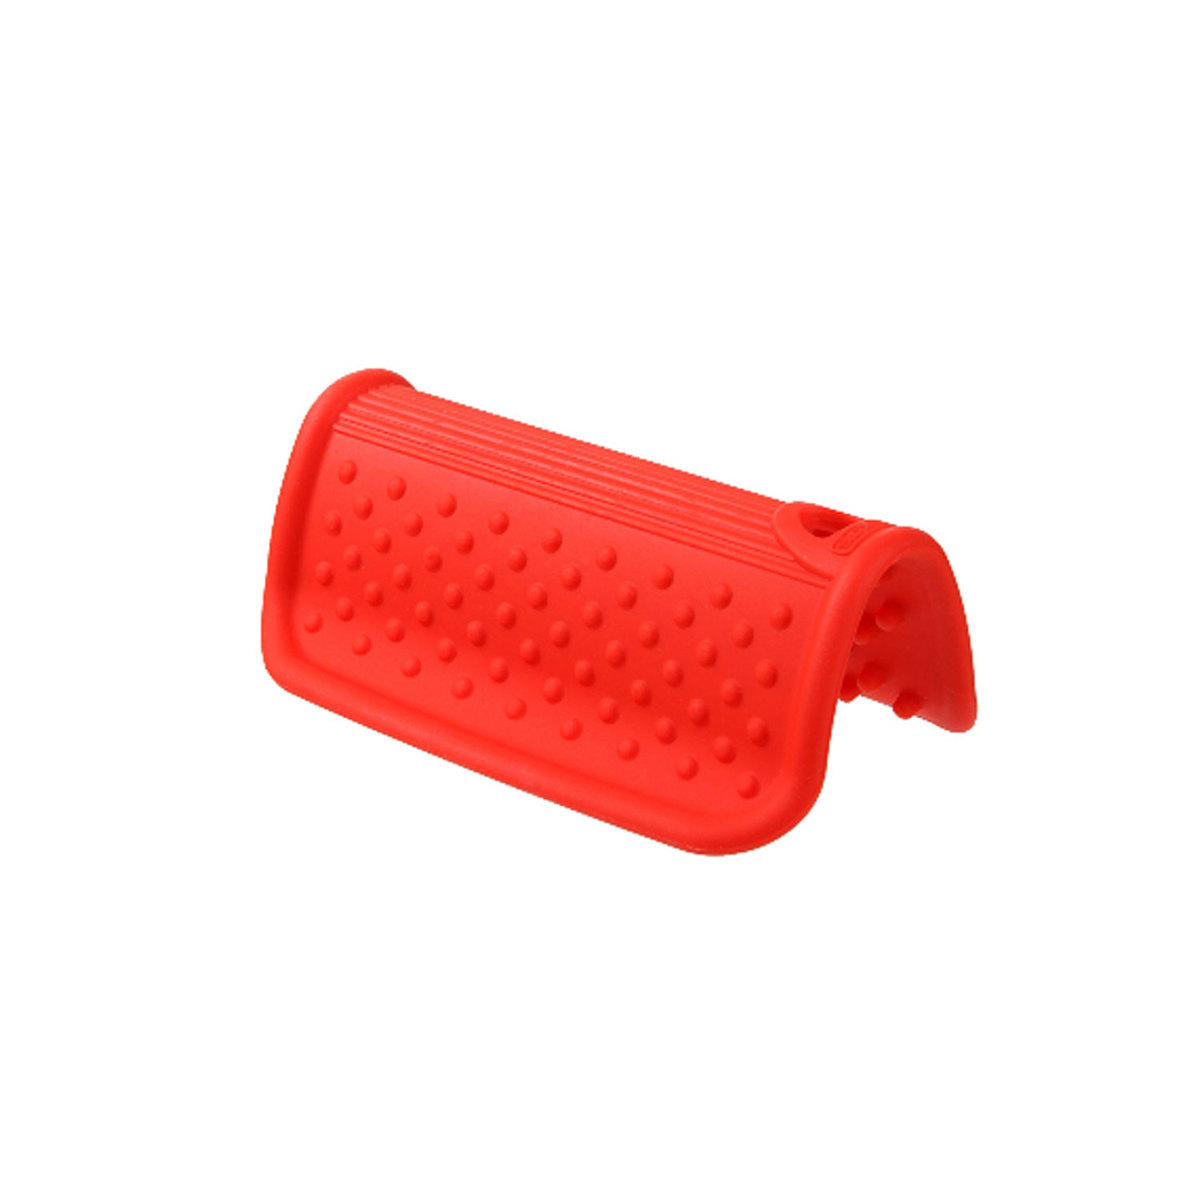 Dexas Silicone Pot Handle Holder - Red